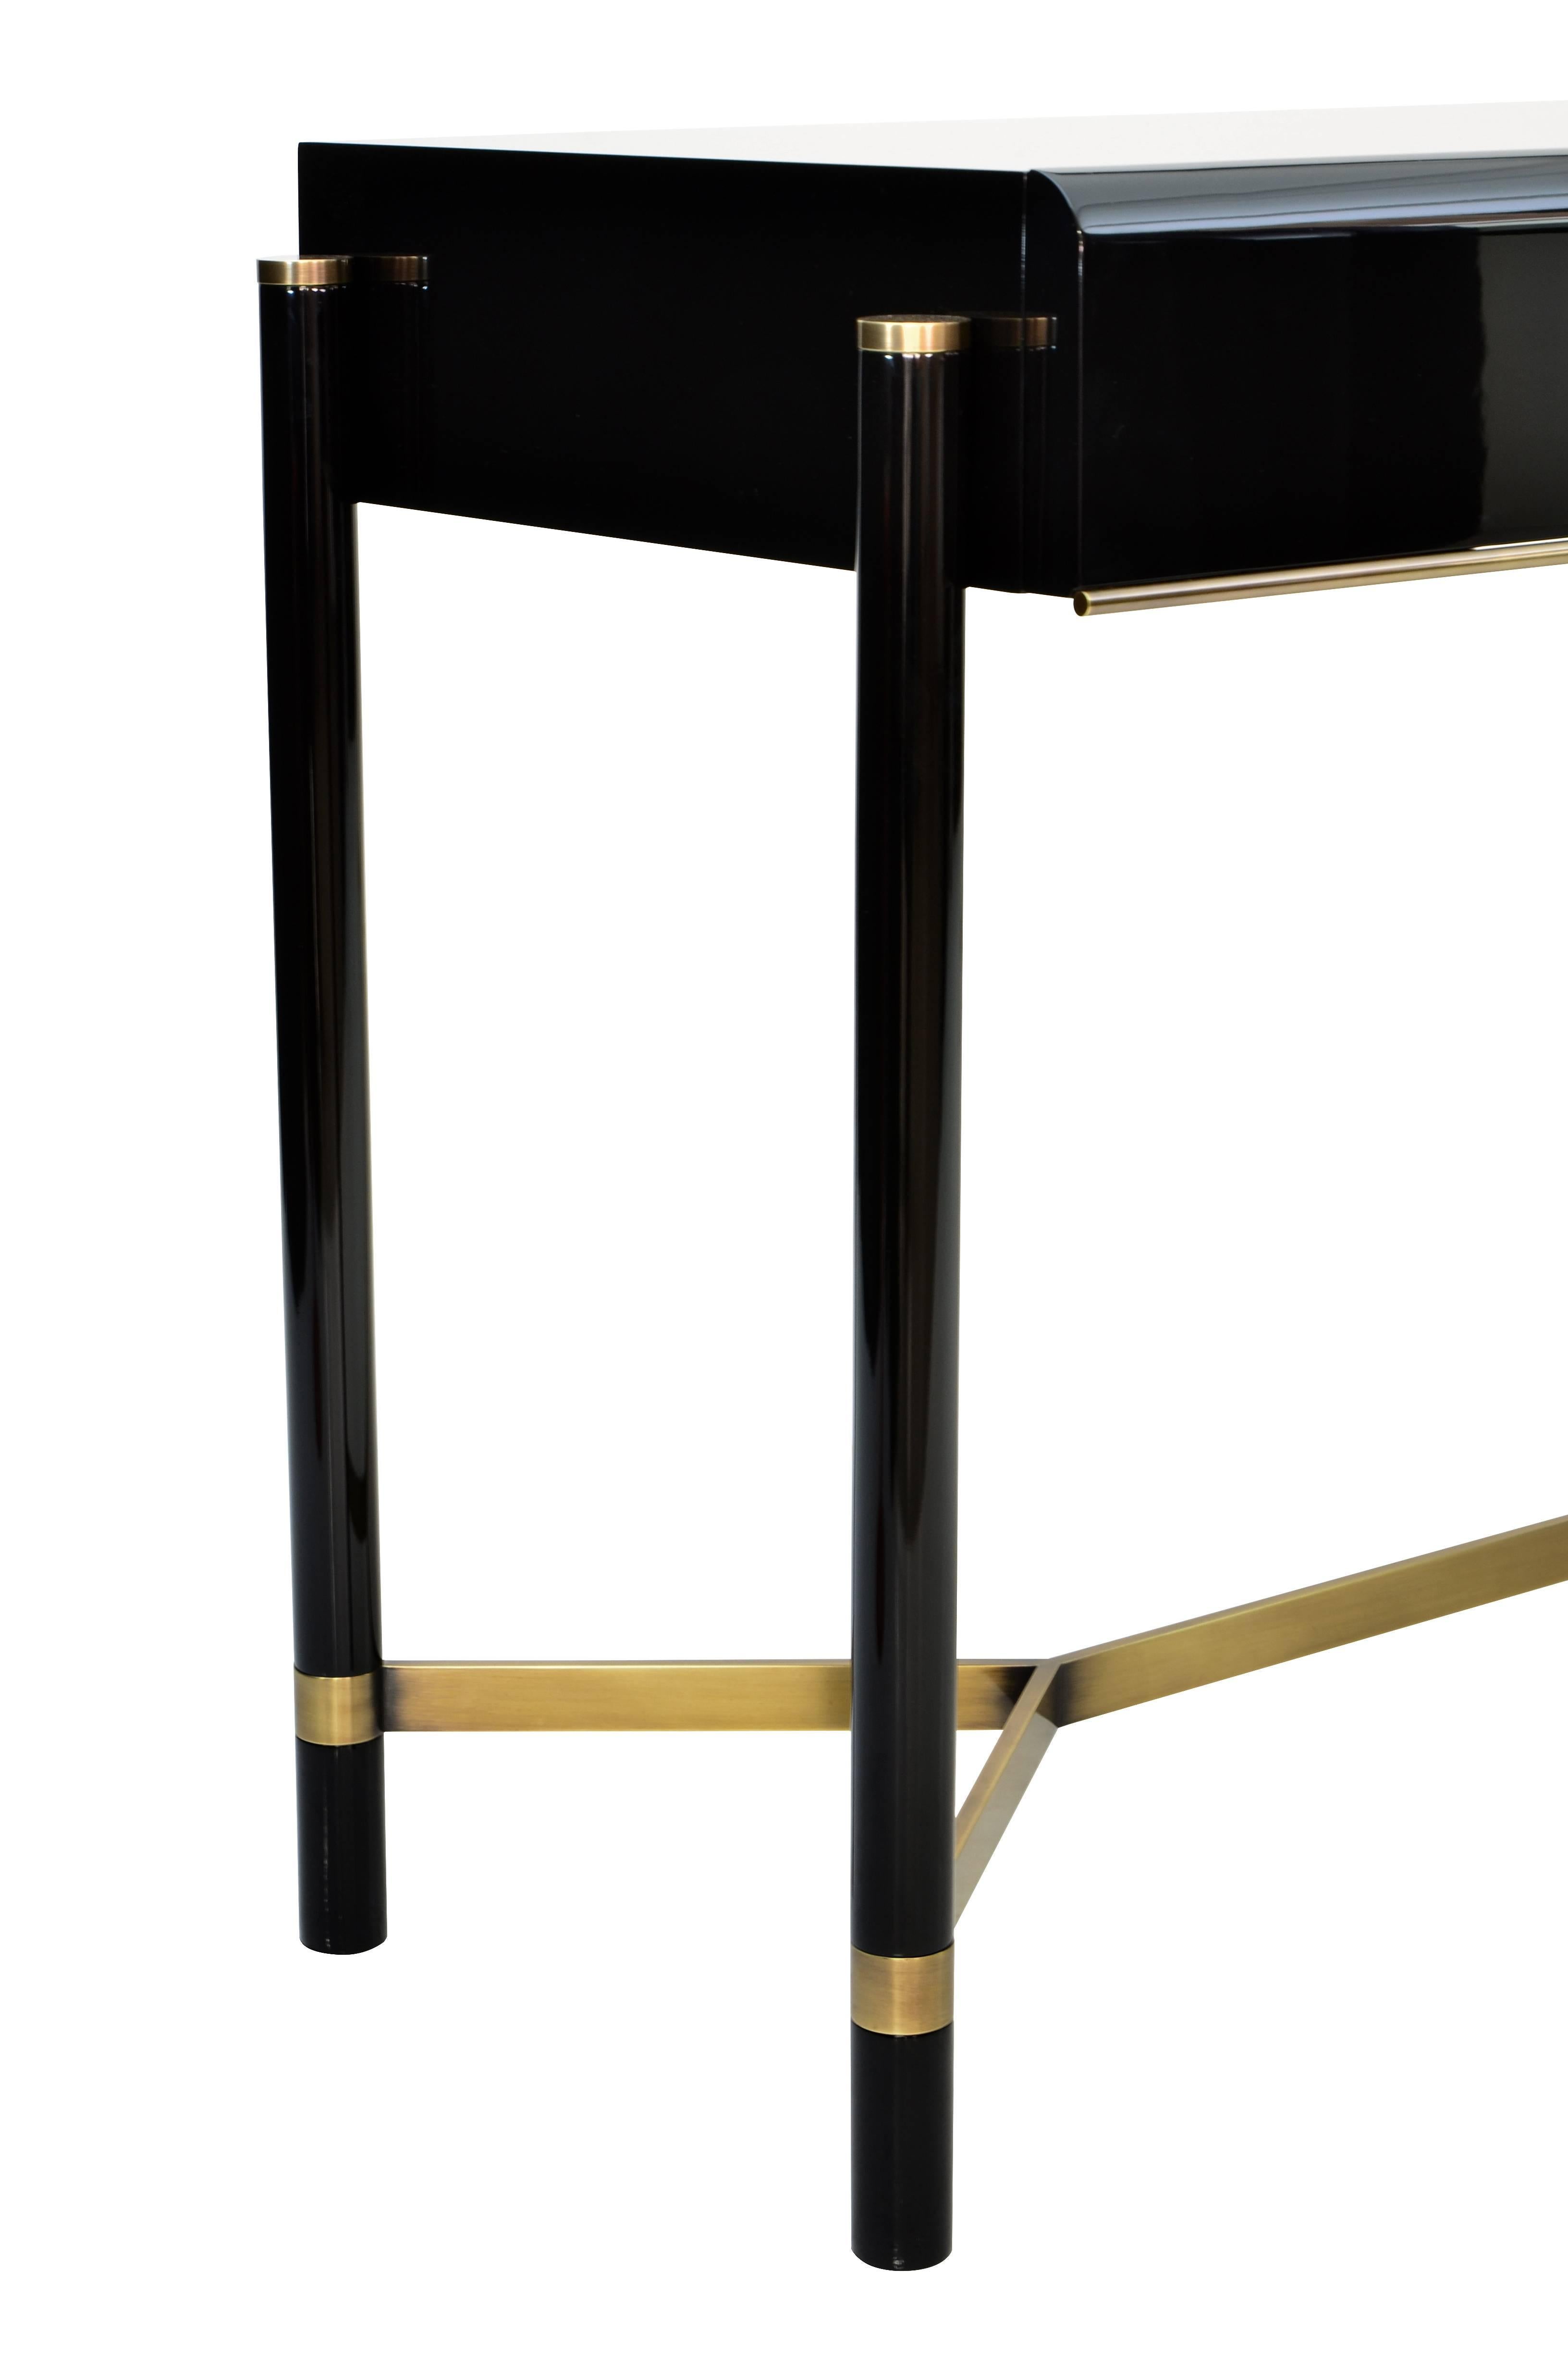 This console table draws inspiration from the 1970's and represents an elegant combination of imbuia hardwood and brass.
Legs in solid wood, veneered or lacquer. Details in solid brass.
Finishing: Polyurethane varnish or lacquer, matte, medium and